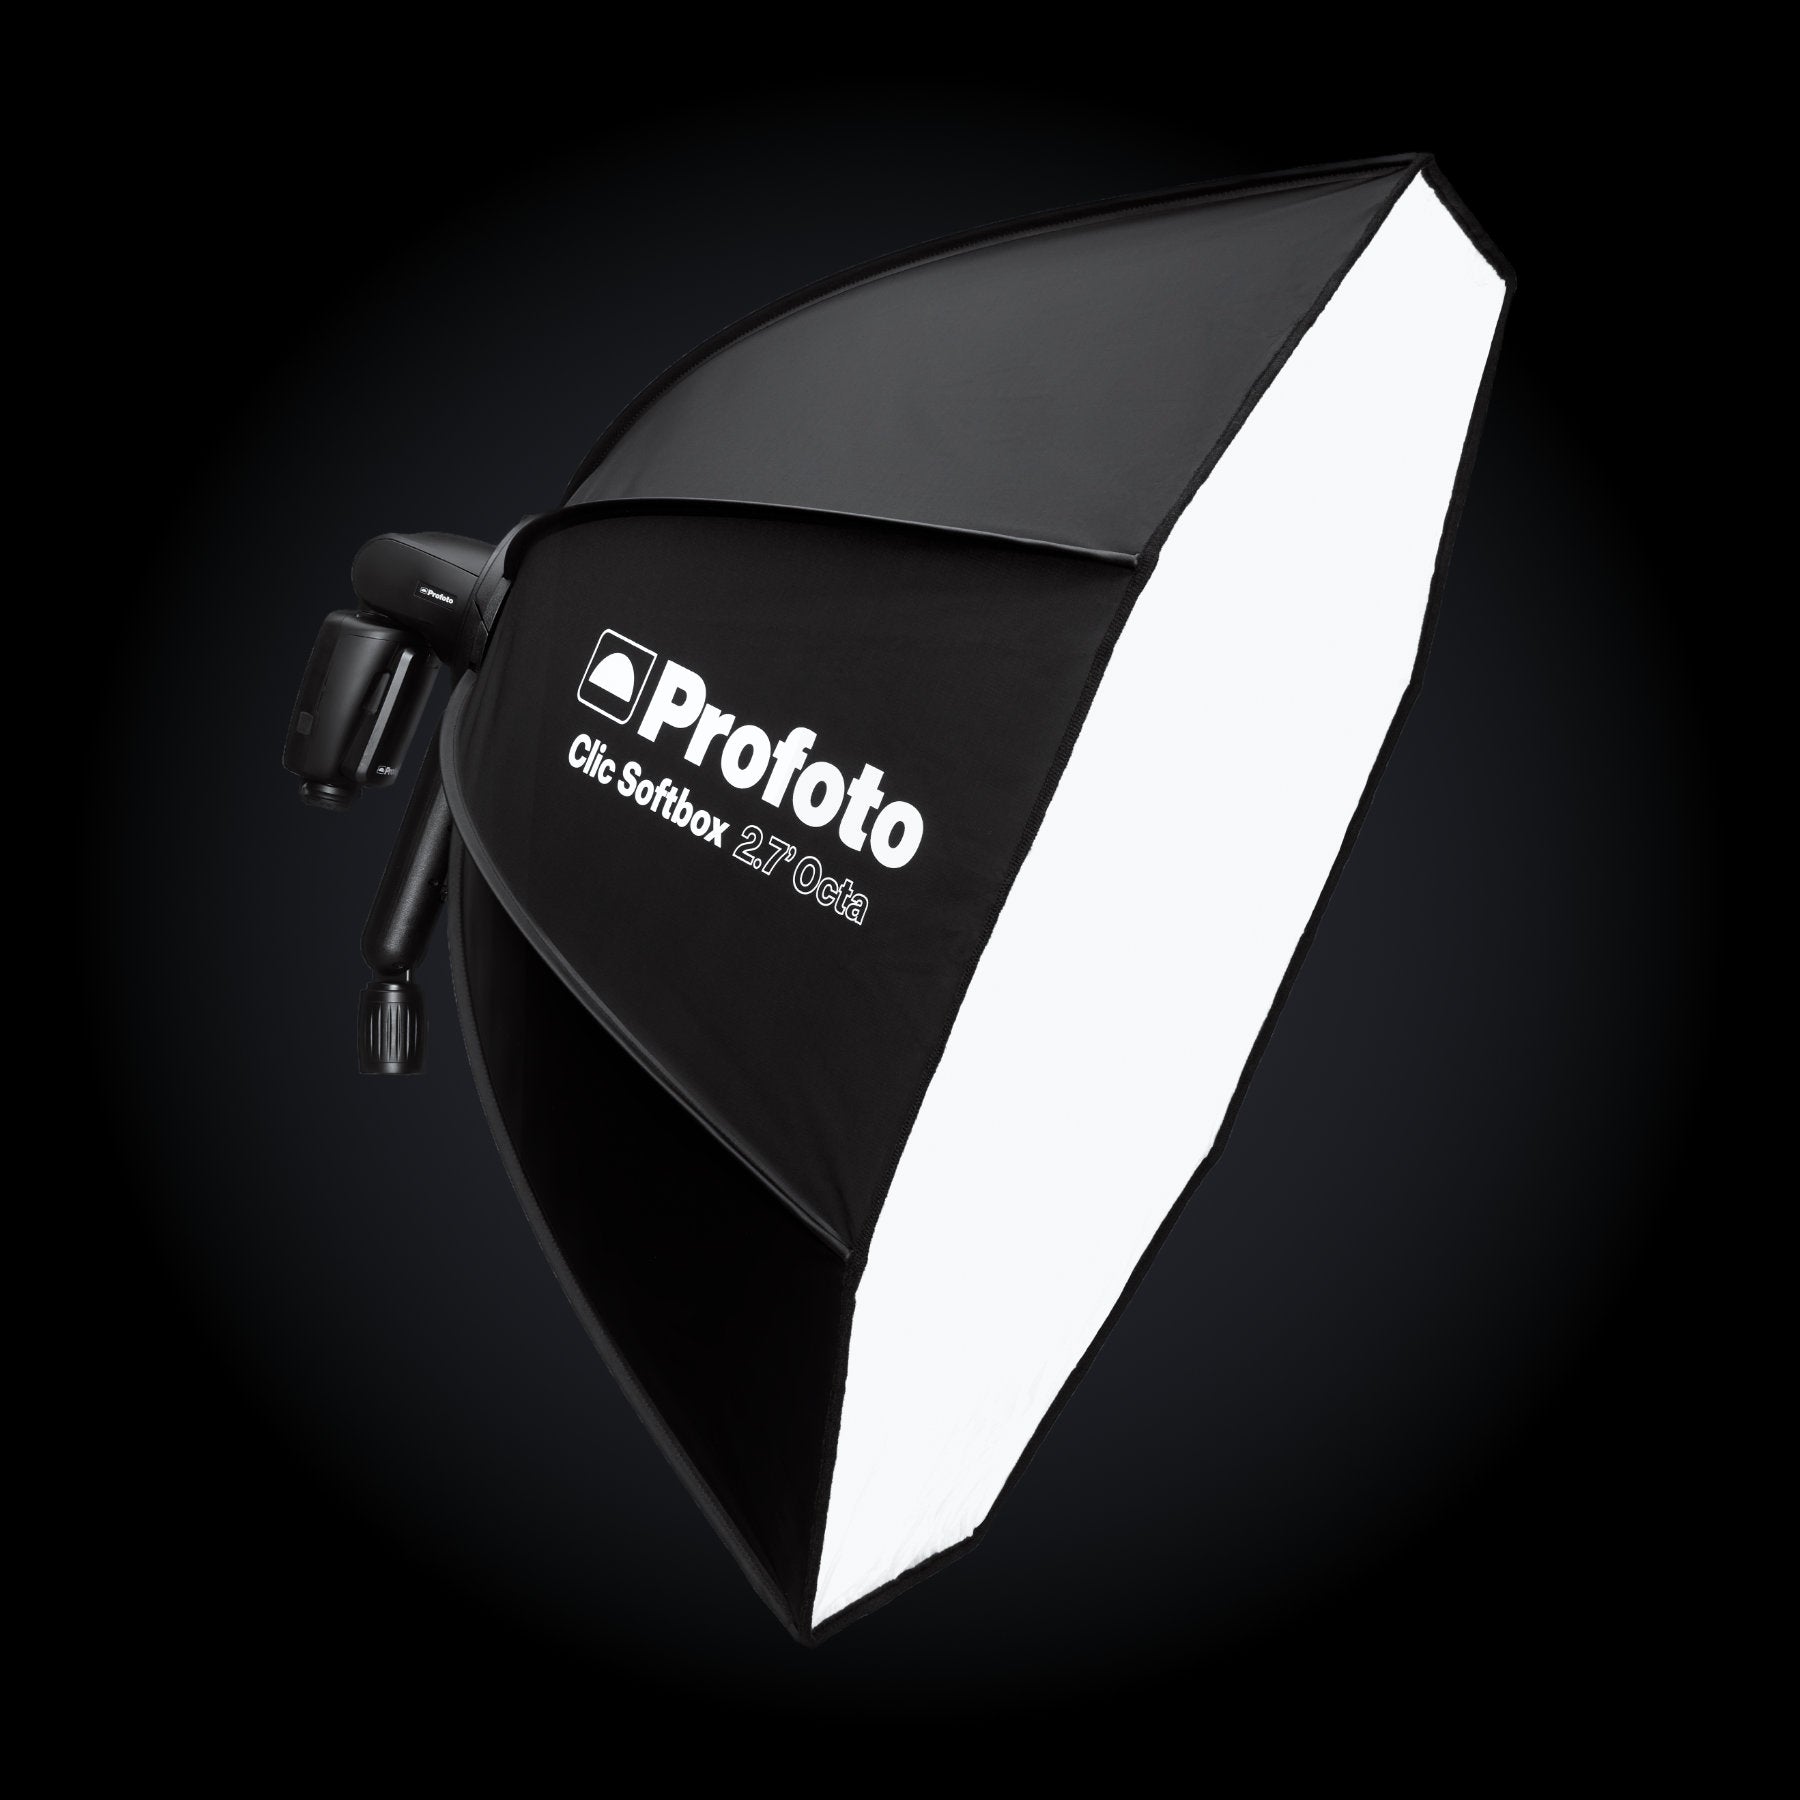 Buy Profoto Clic Softbox 2.7’ (80cm) Octa at Profoto NZ by Topic an authorised reseller